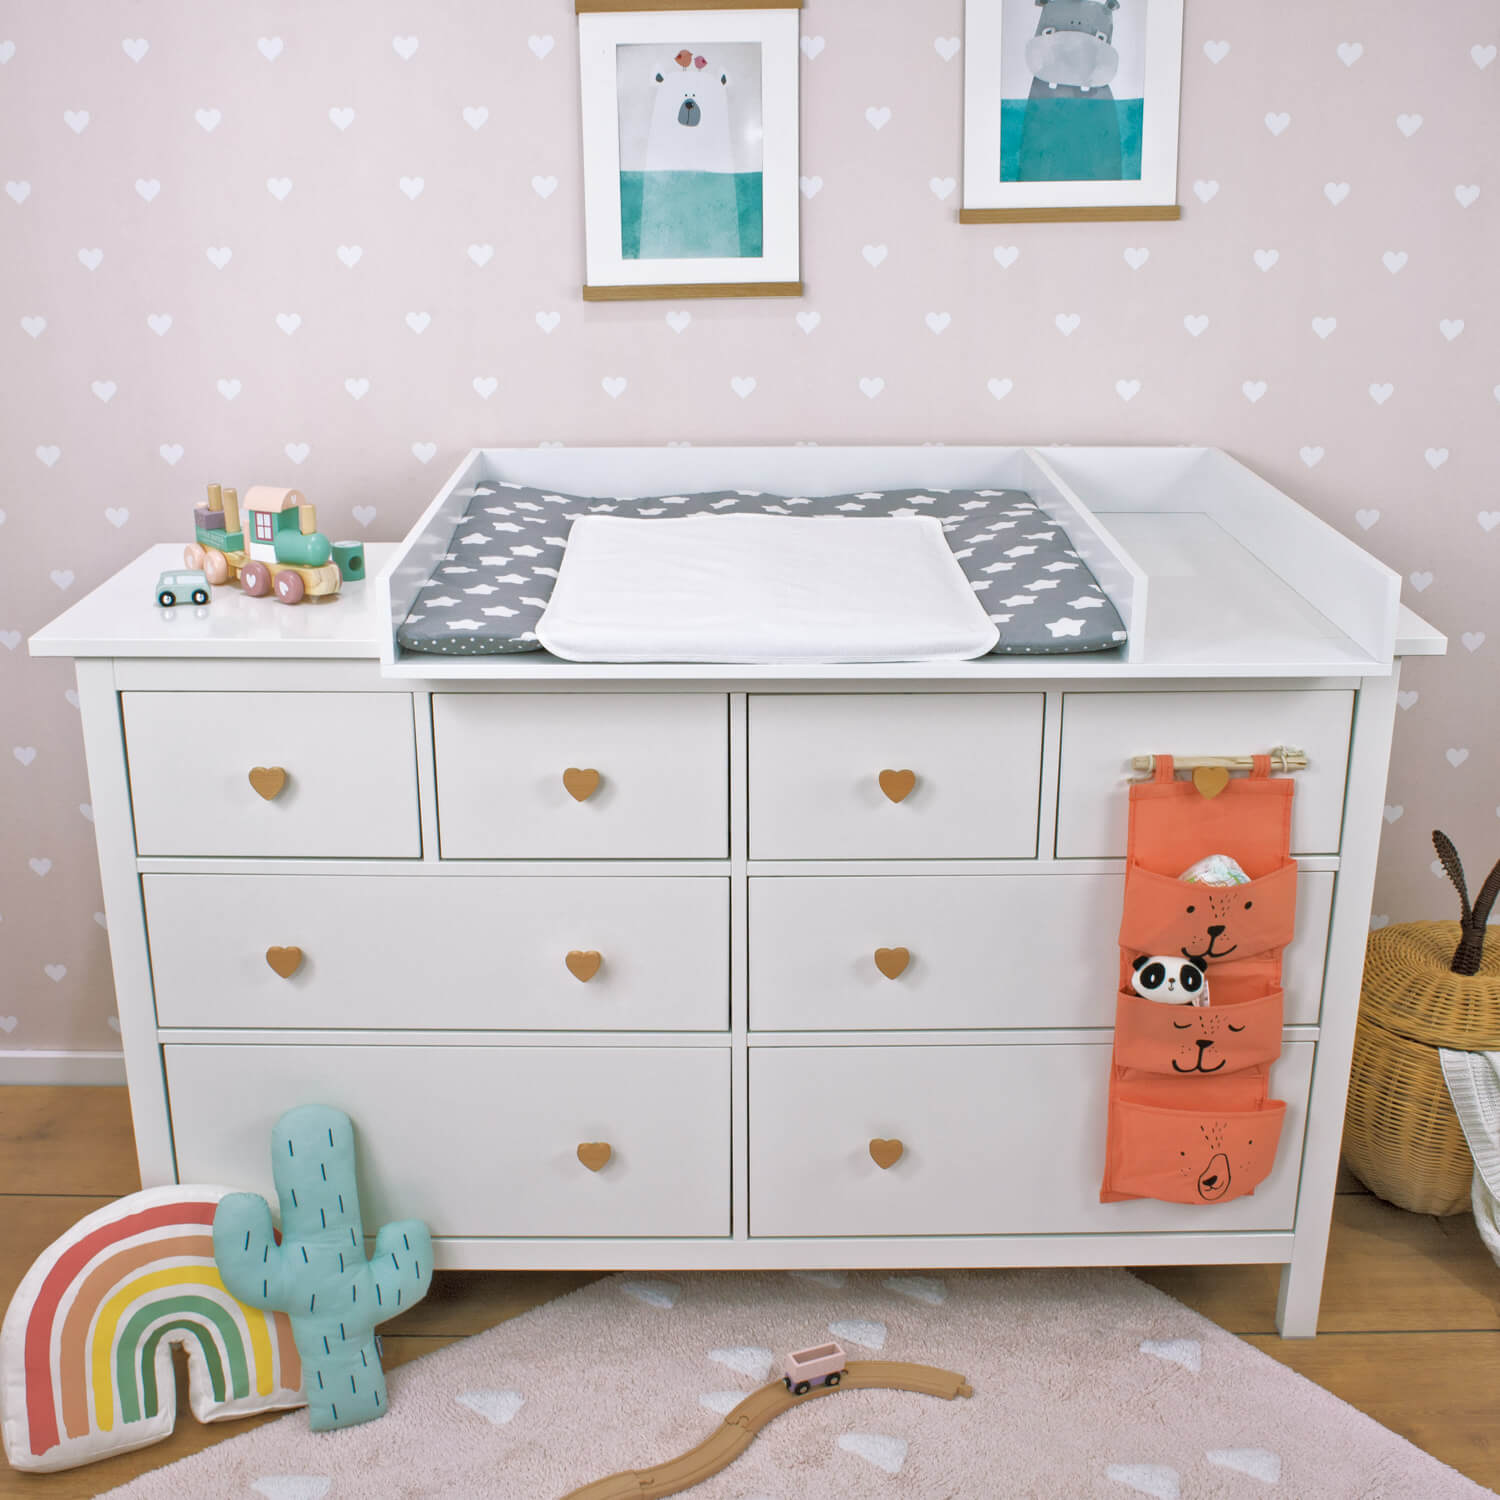 Transform Your Ikea Hemnes Dresser Into, Turn Dresser Into Changing Table